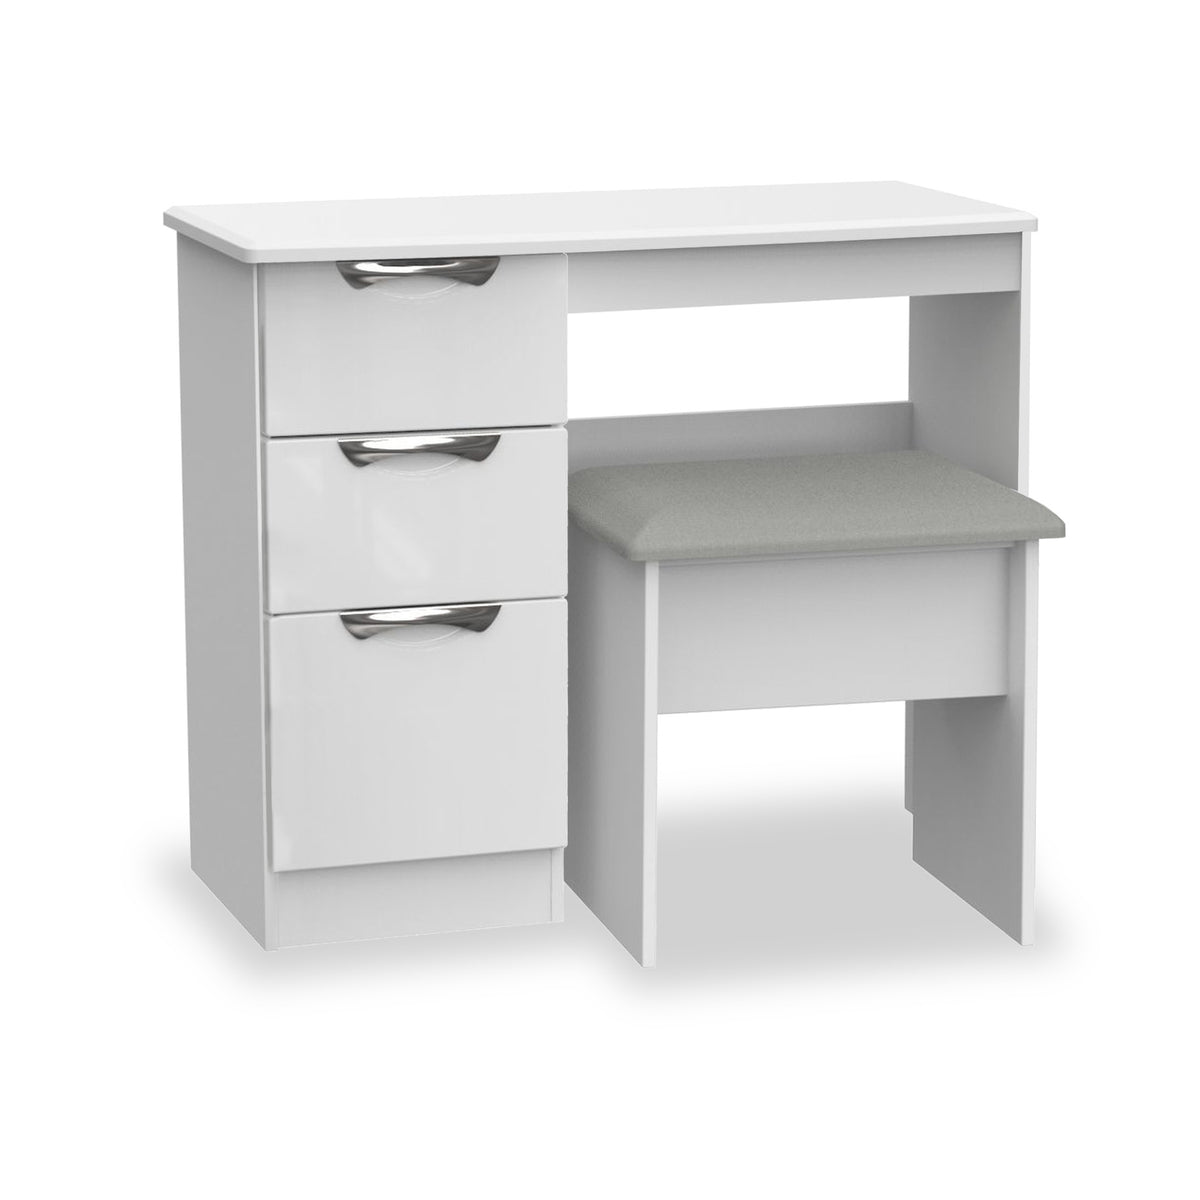 Beckett White Gloss Dressing Table with Stool from Roseland